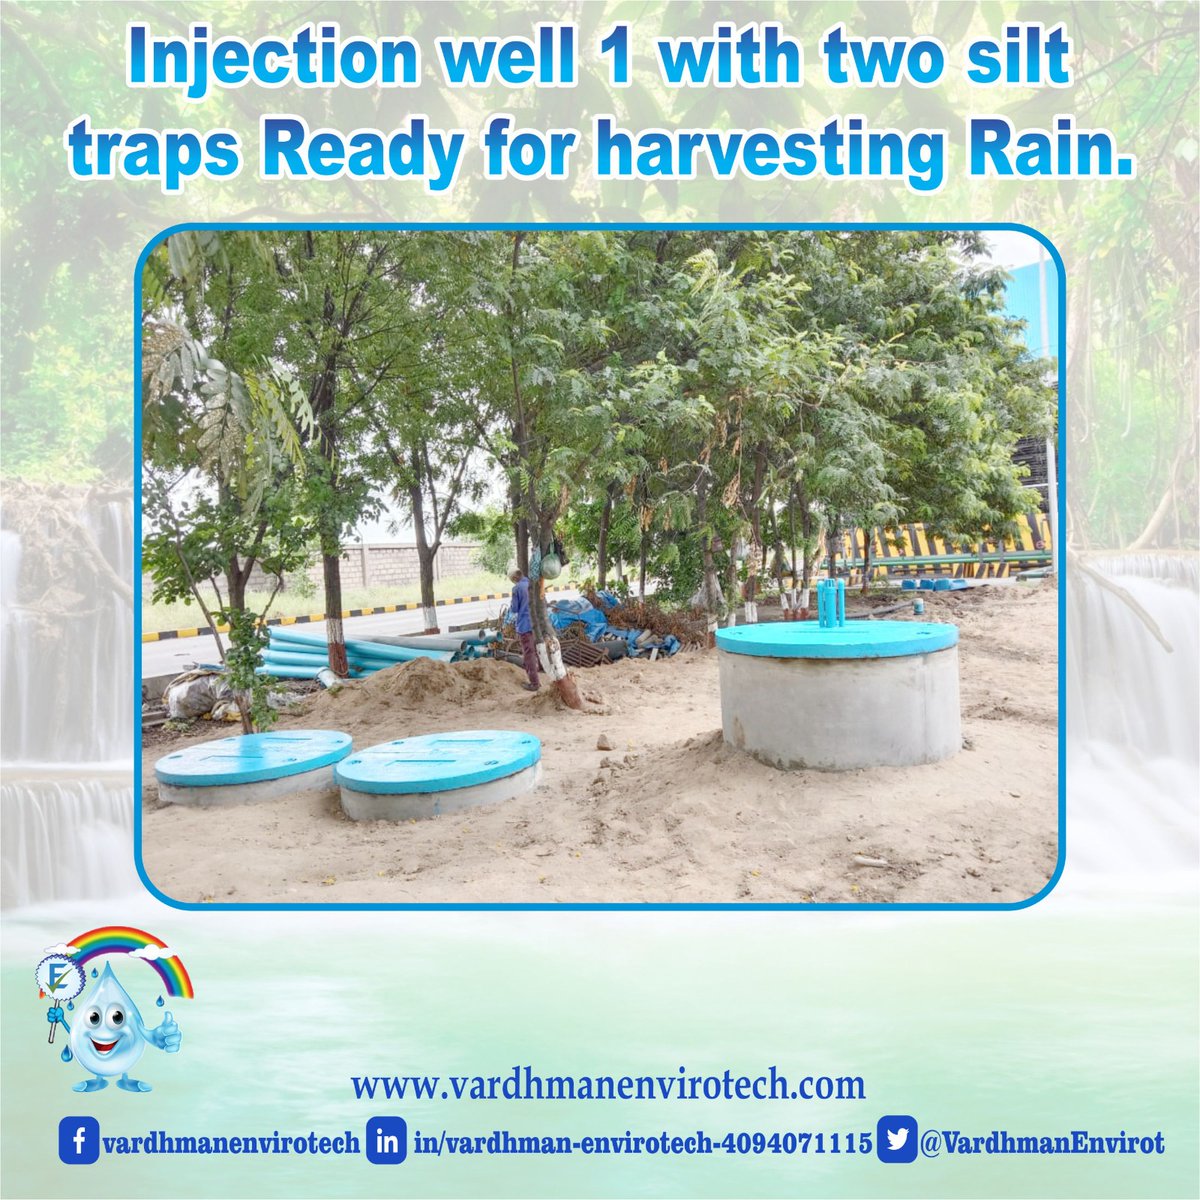 Make it Rain ready… March - June are extremely critical months for us - as the dry season allows us to construct hope for our communities - #rainwaterharvesting structures! Vardhman Envirotech believes in #catcheverydrop when it falls and where it falls.